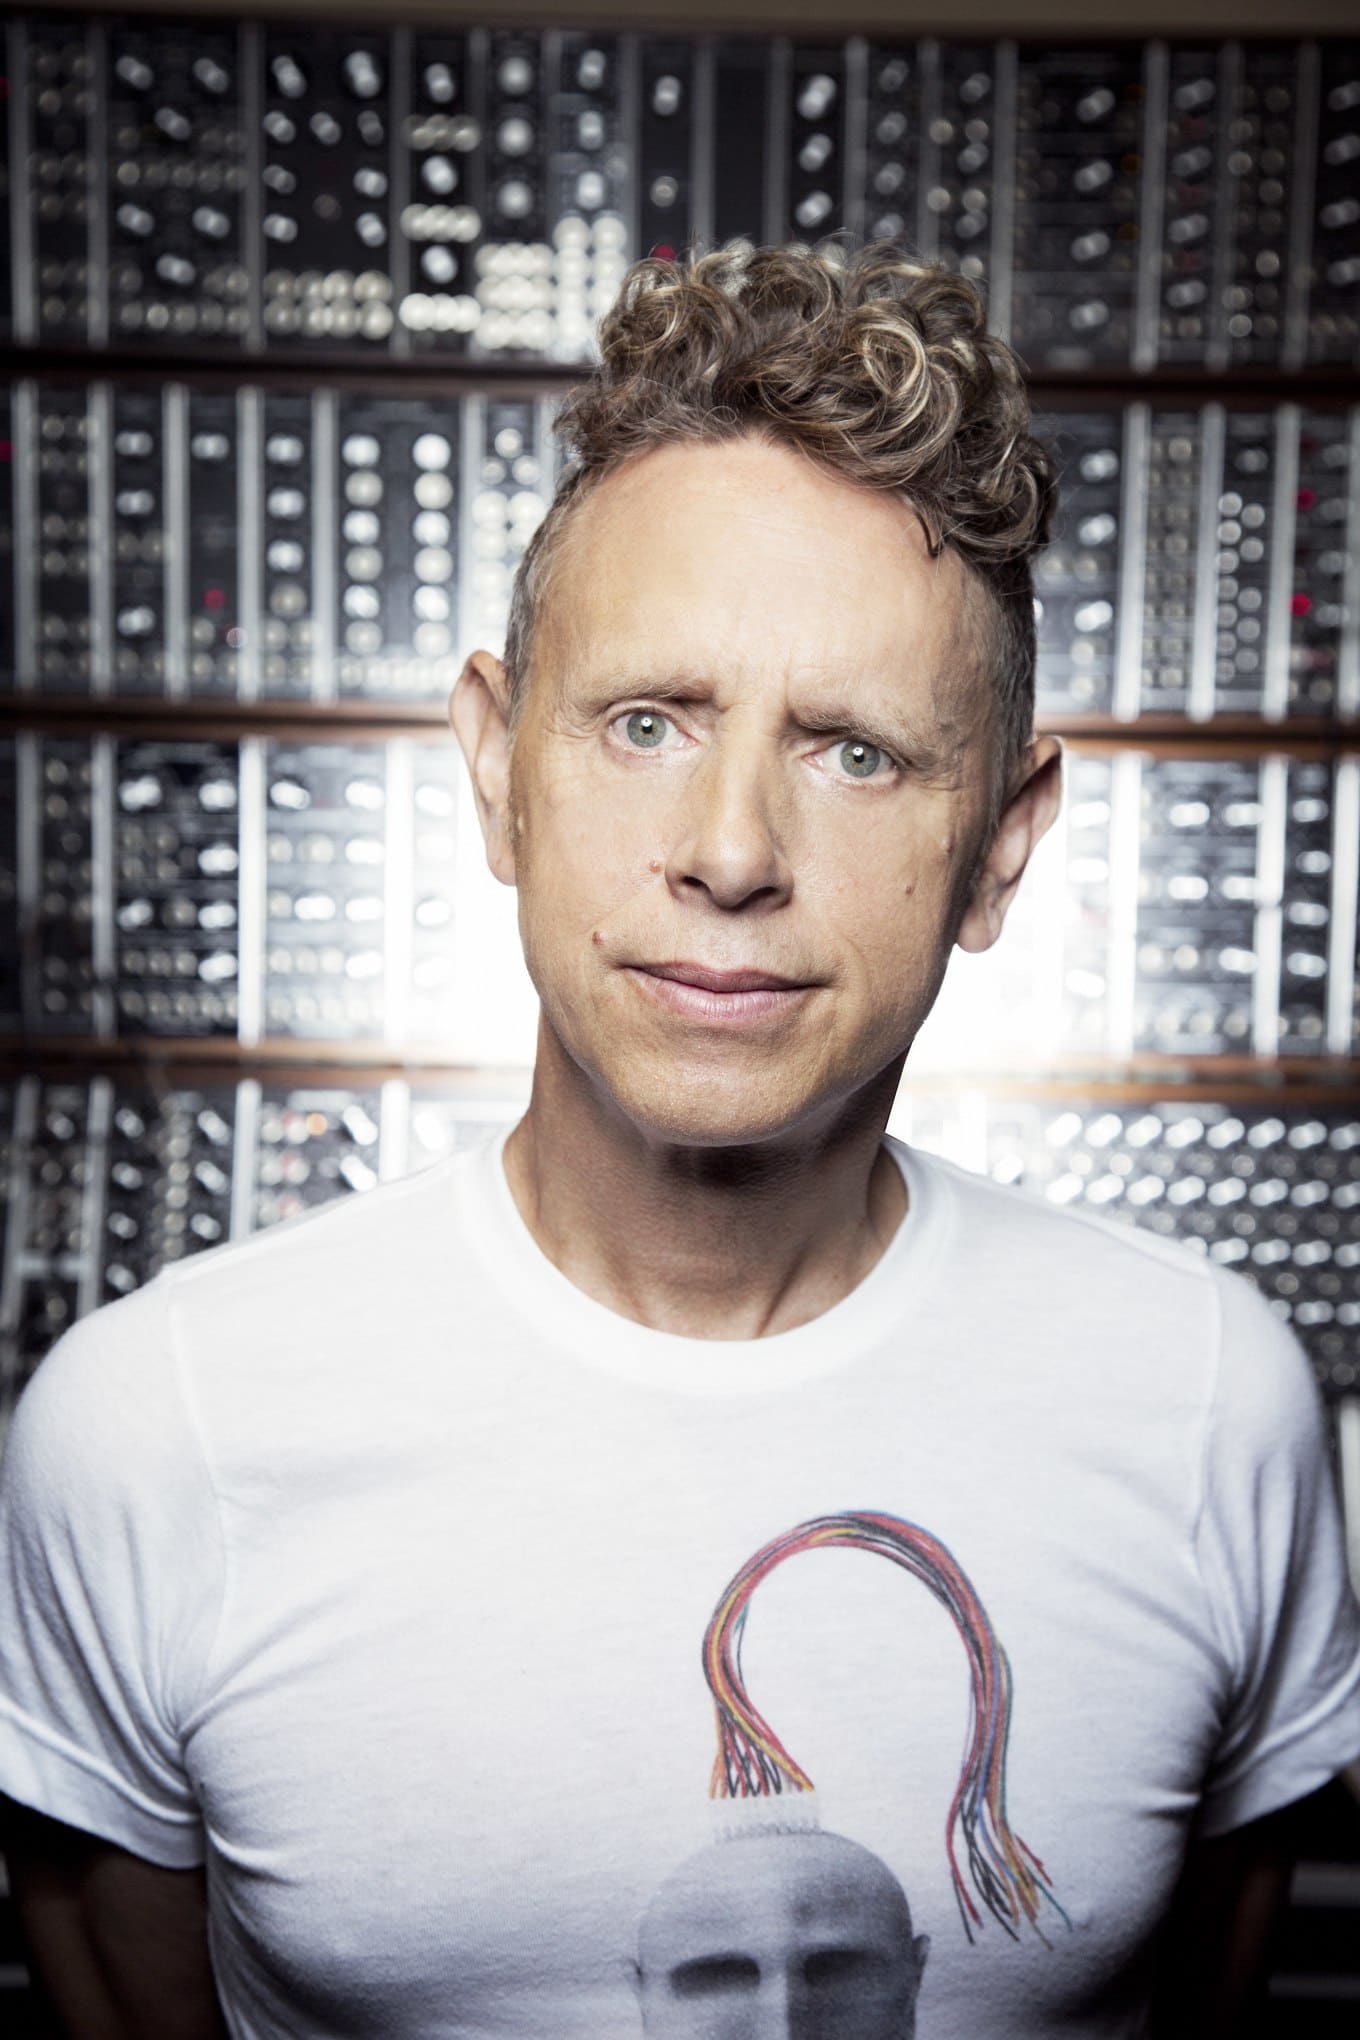 Depeche Mode's Martin Gore: 'I Can't Claim That the Songs Were All